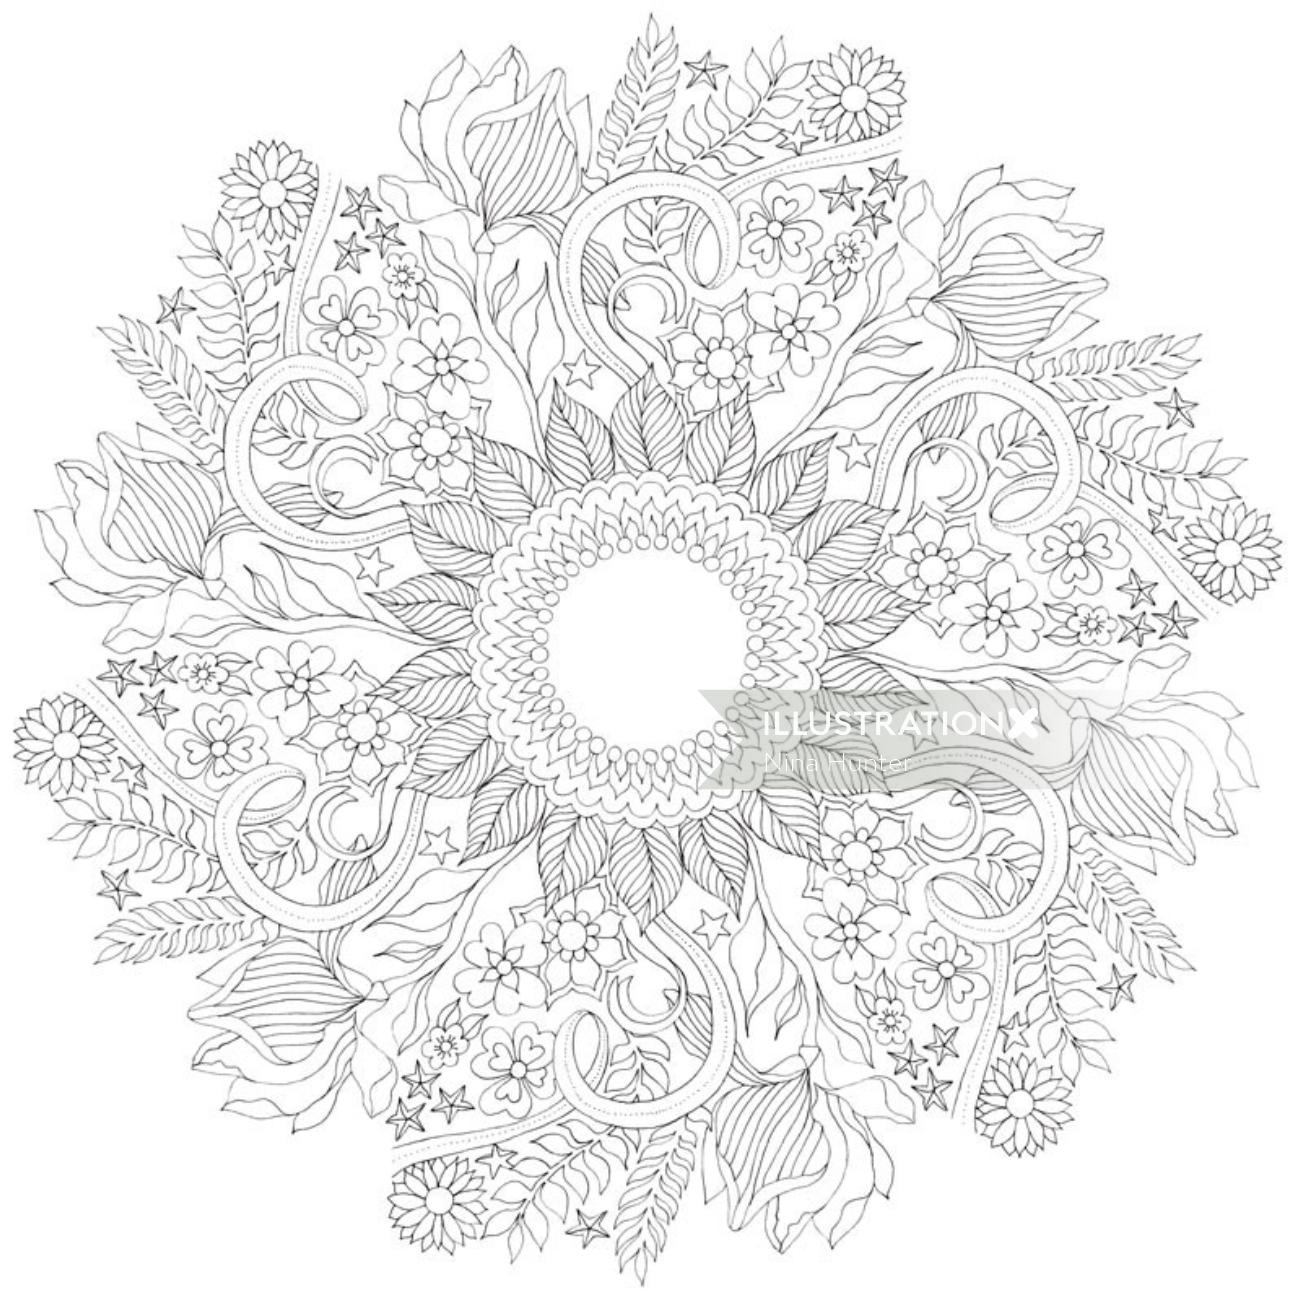 Graphic Flower in black and white